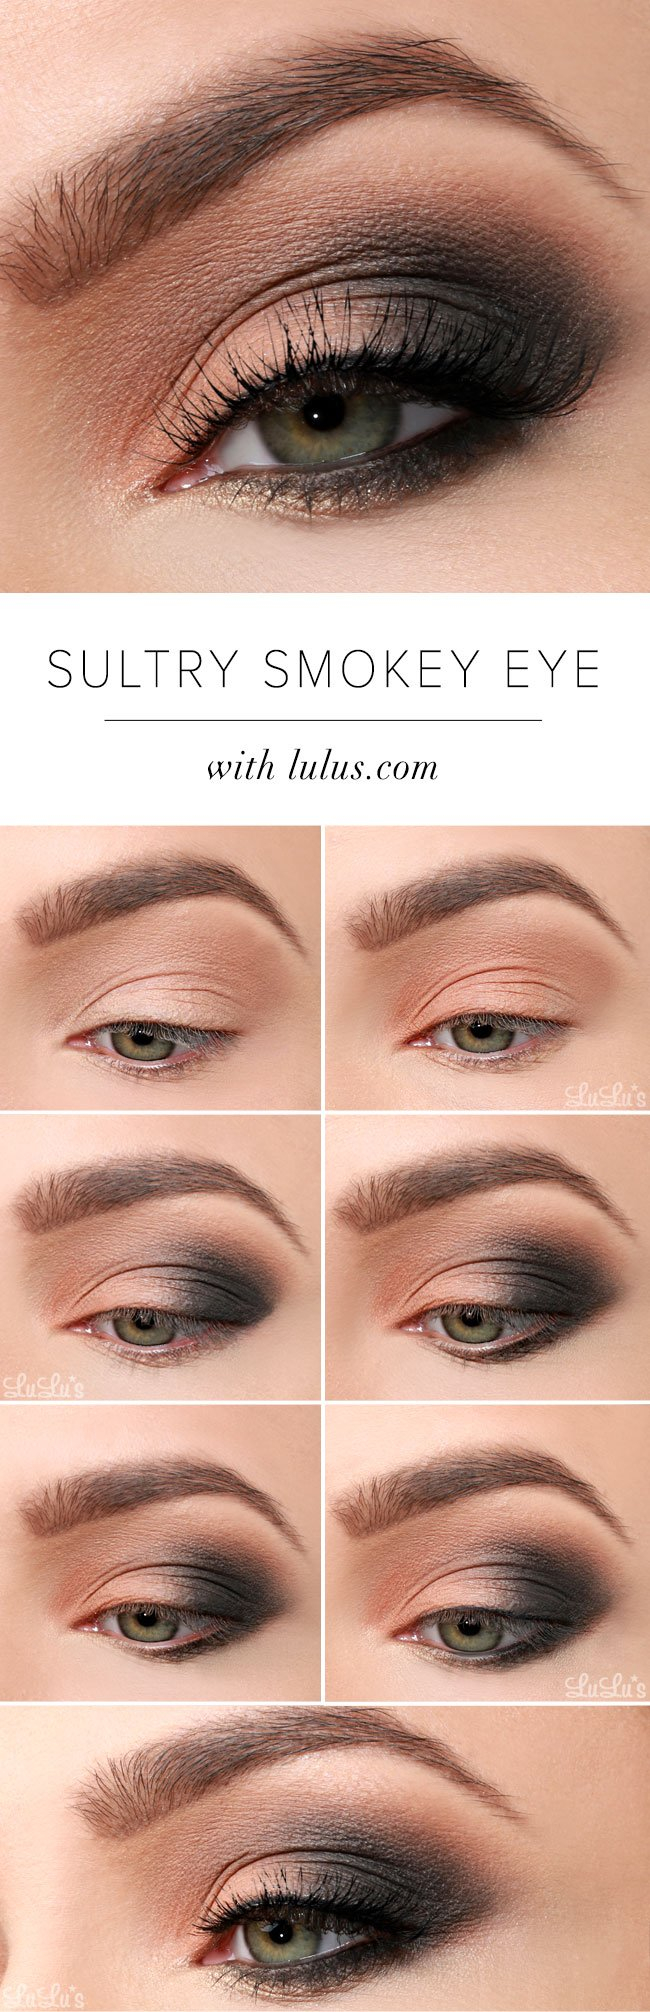 Eye Makeup Step By Step Instructions With Pictures 15 Smokey Eye Tutorials Step Step Guide To Perfect Hollywood Makeup